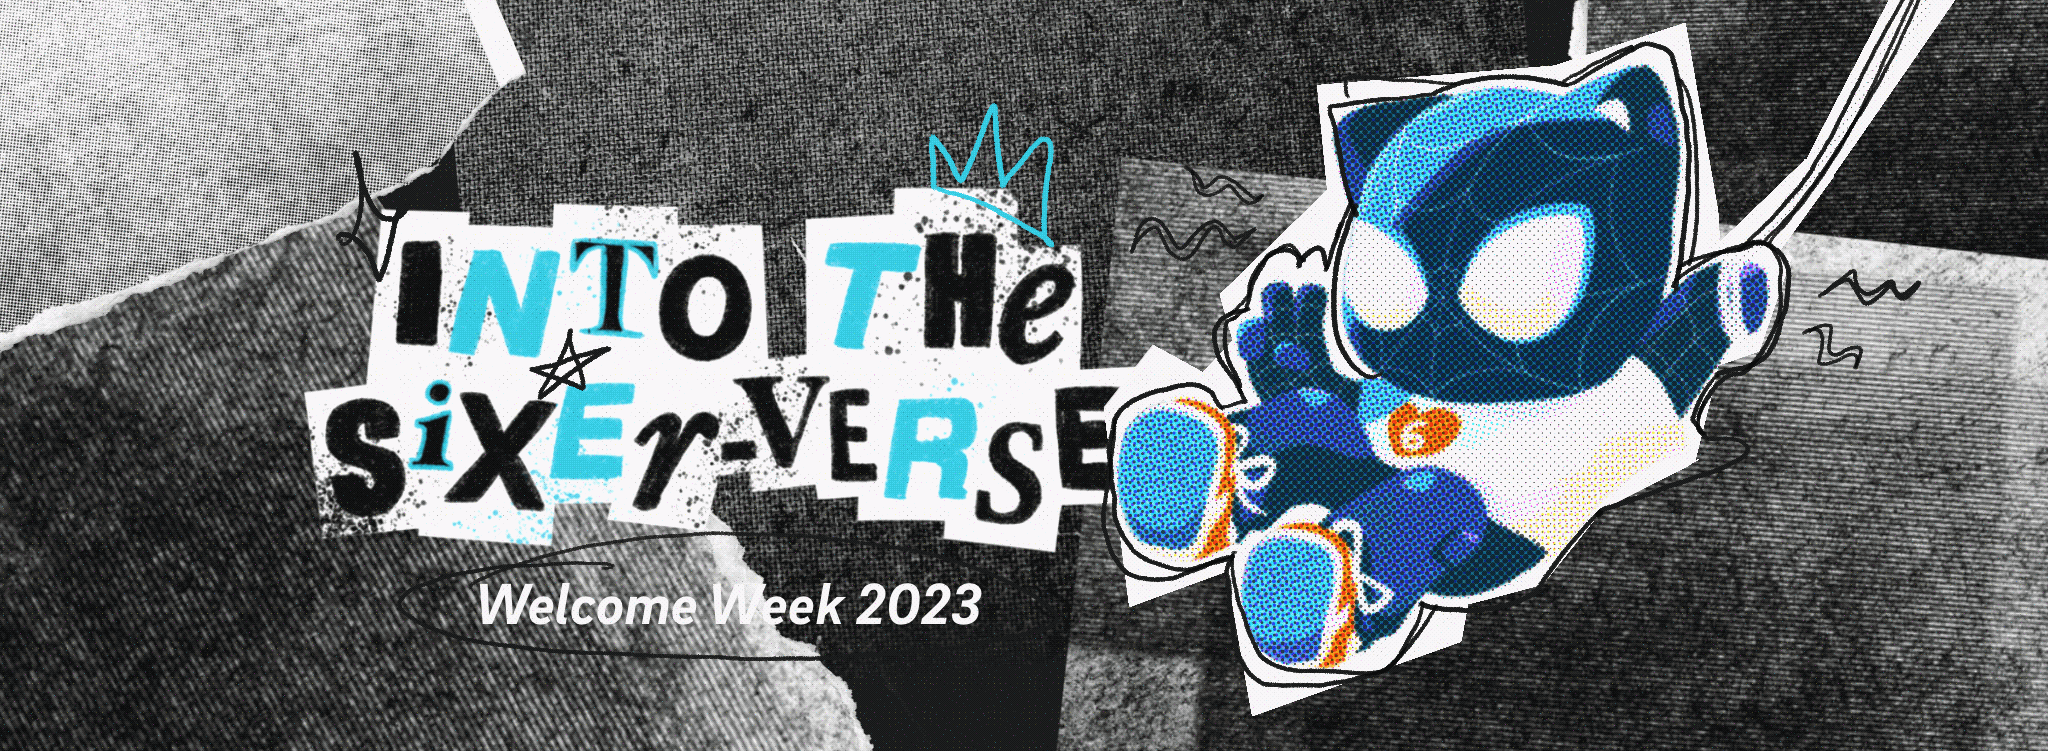 Welcome Week Banner 2023: Into the Sixer-Verse